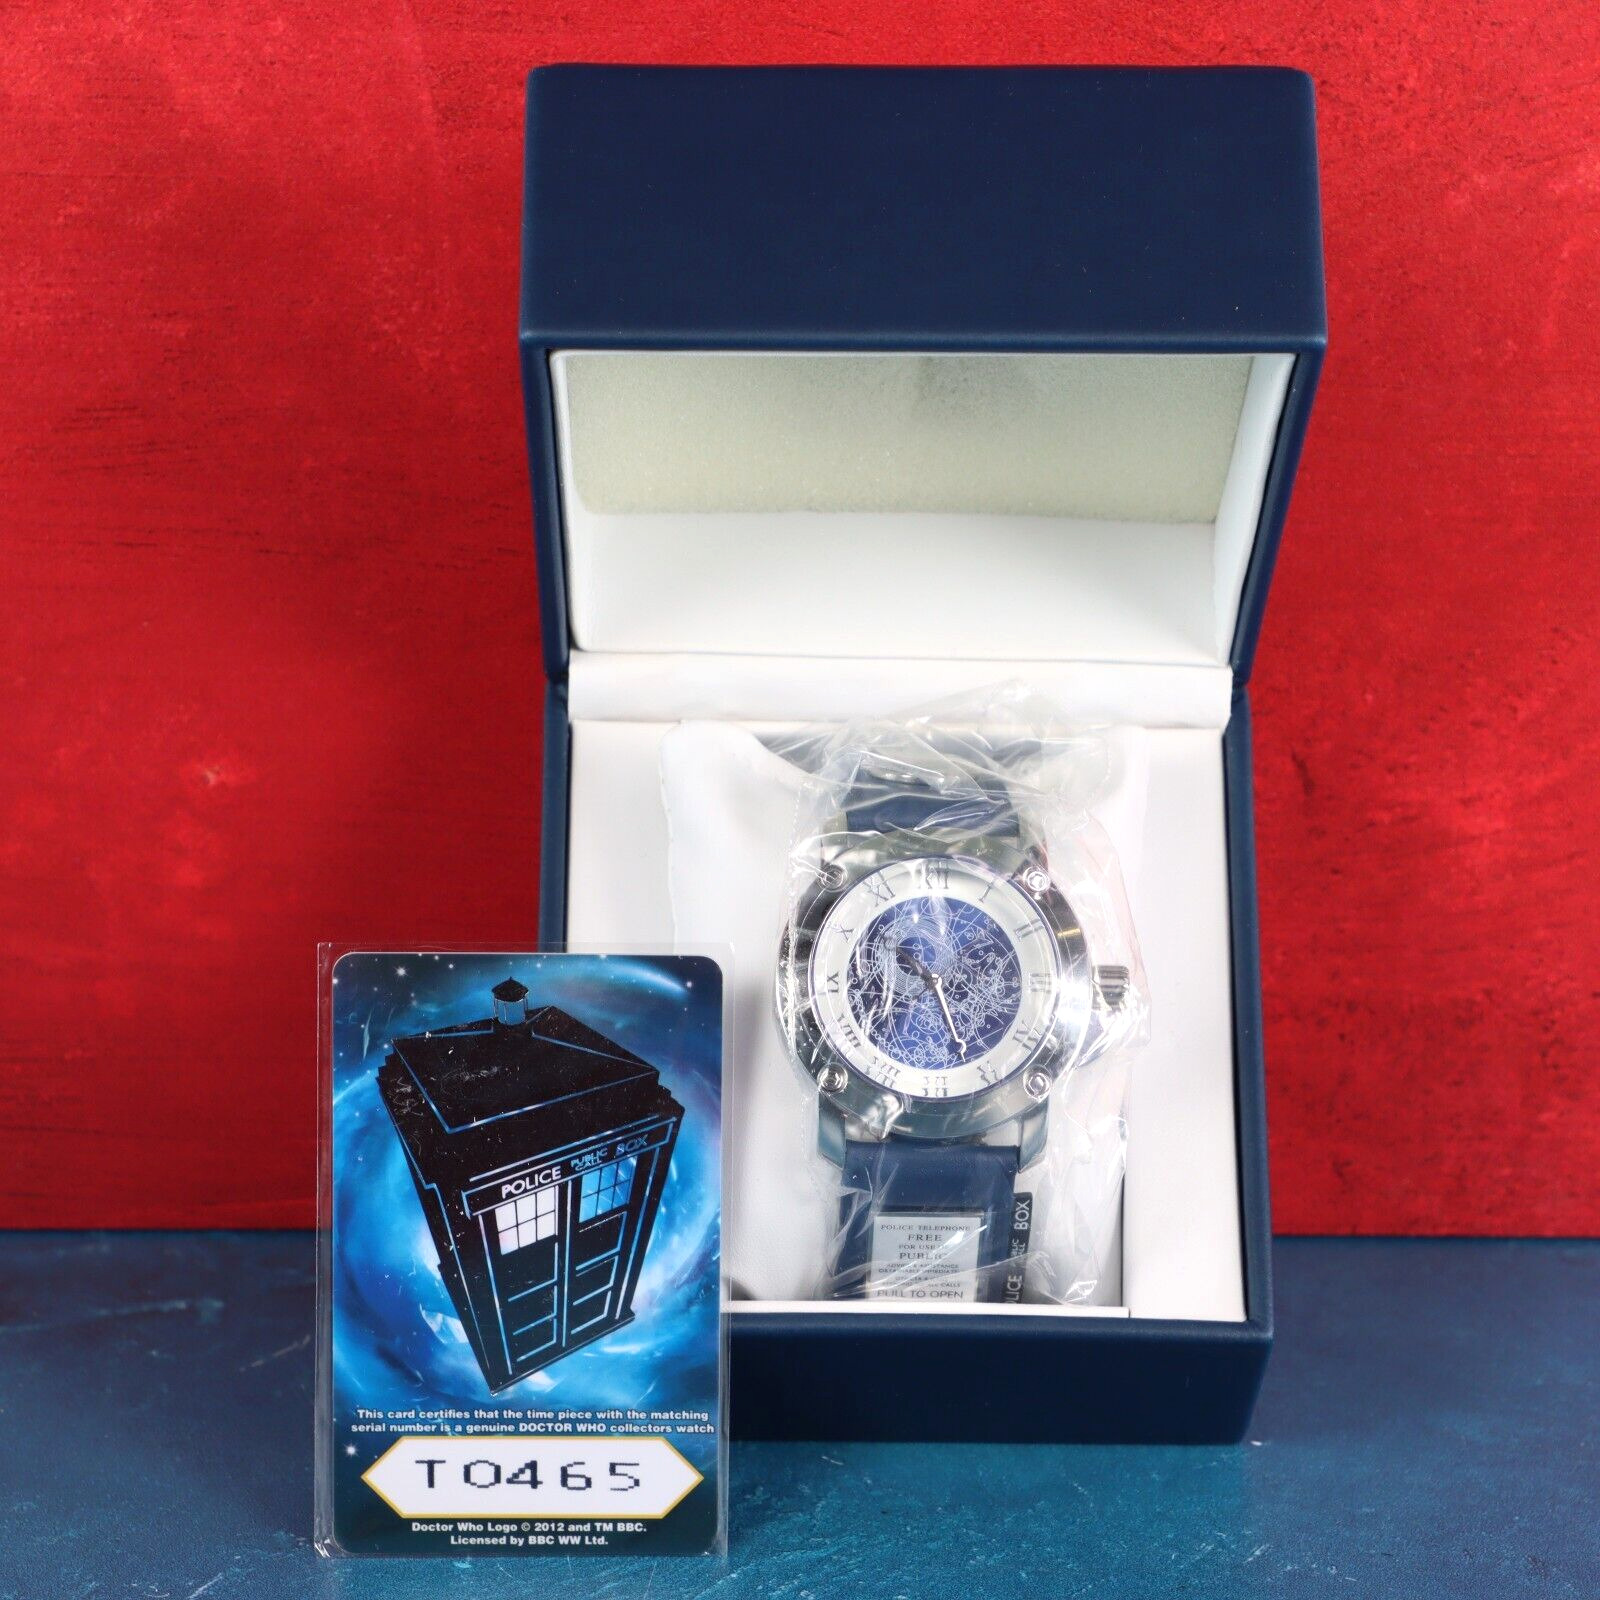 Doctor Who TARDIS Collectors Watch T0465 Limited Edition COA BBC 2012 New In Box